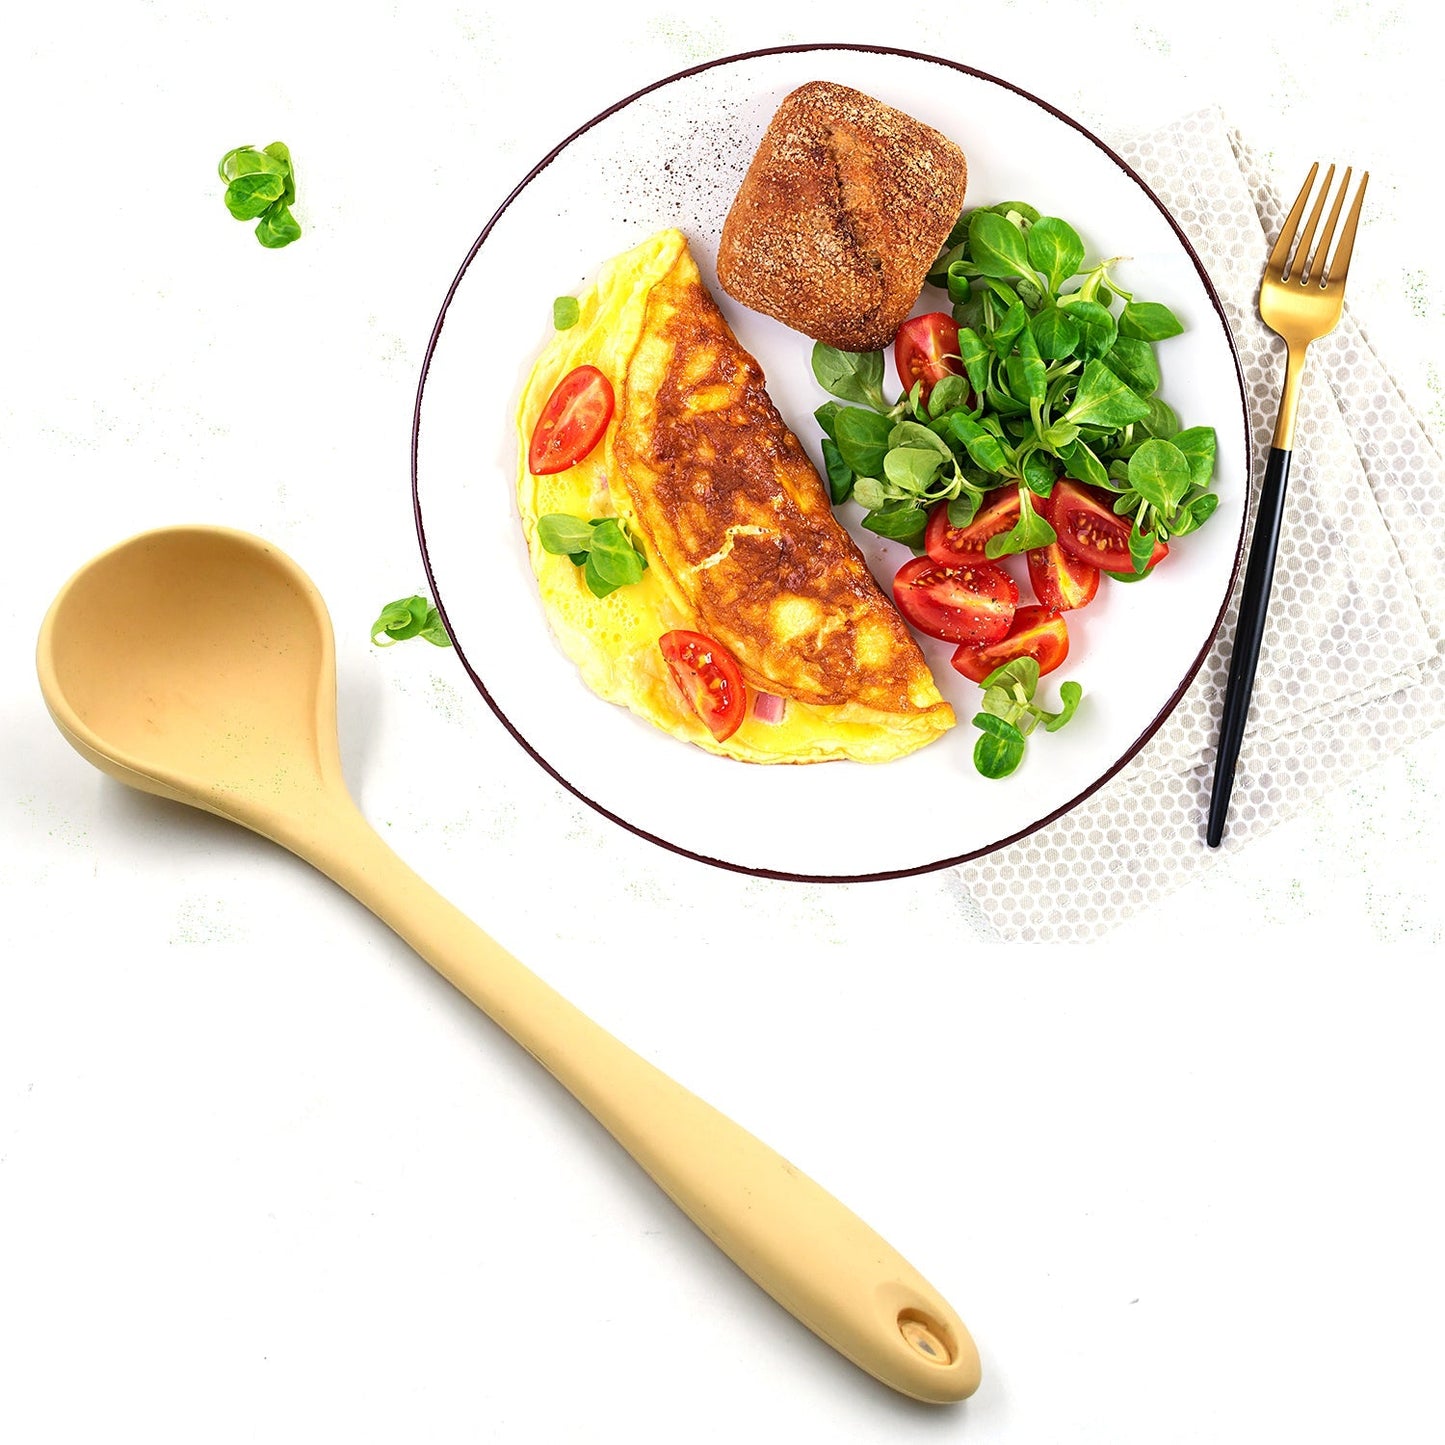 5452 Silicone Ladle Spoon, Heat Resistant Soup Ladle Scoop Spatula with Hygienic Solid Coating FDA Grade (28cm)